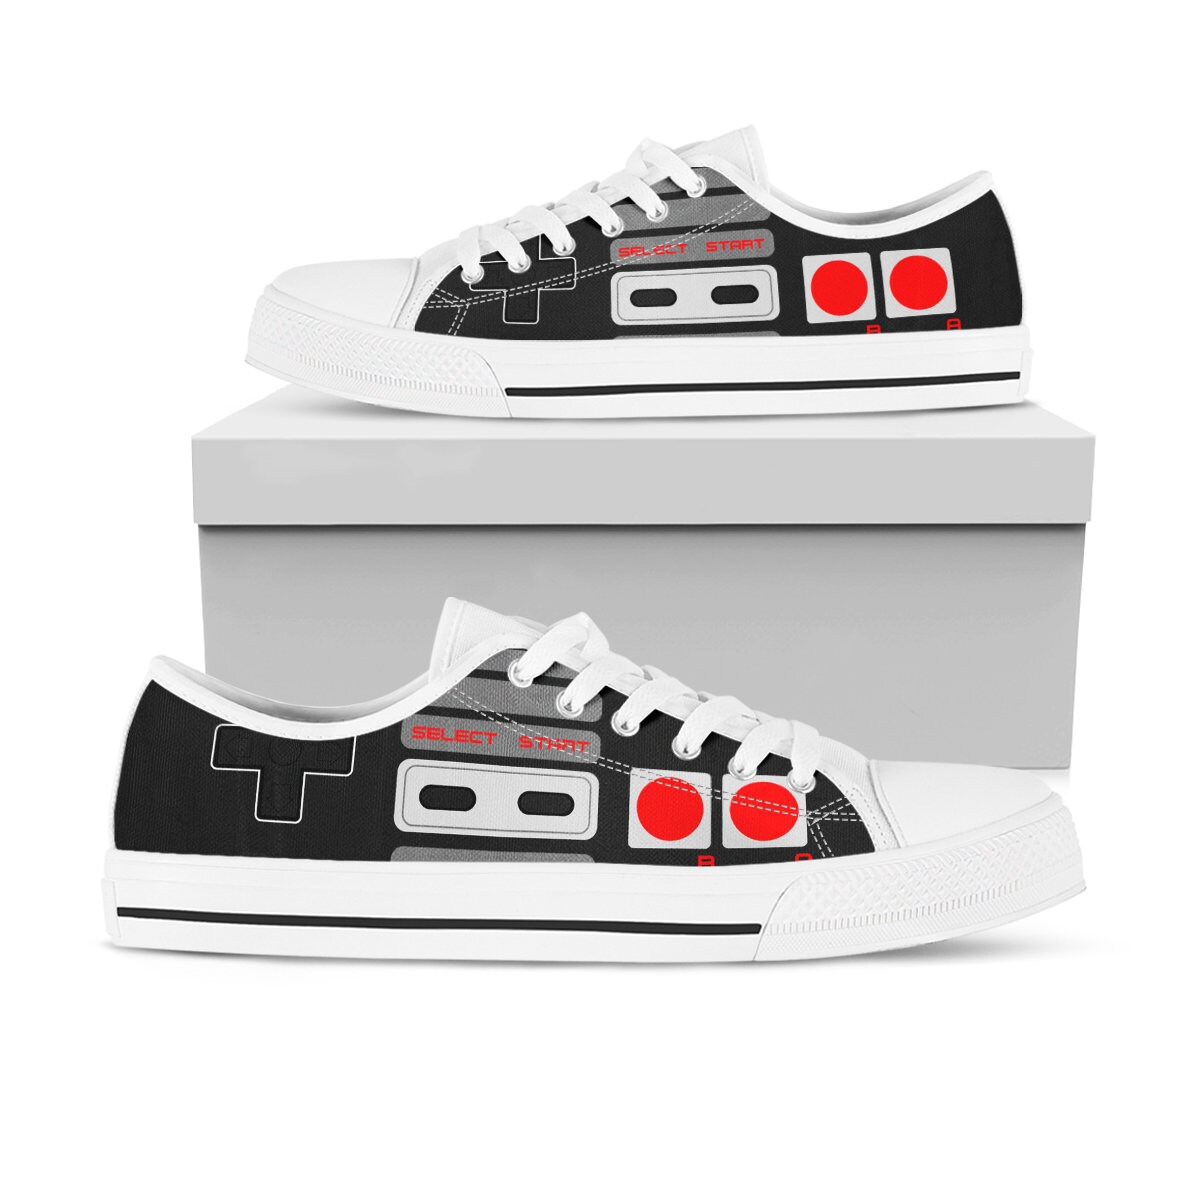 NES Controller Shoes Low Top Classic Game Shoes Vintage - Etsy